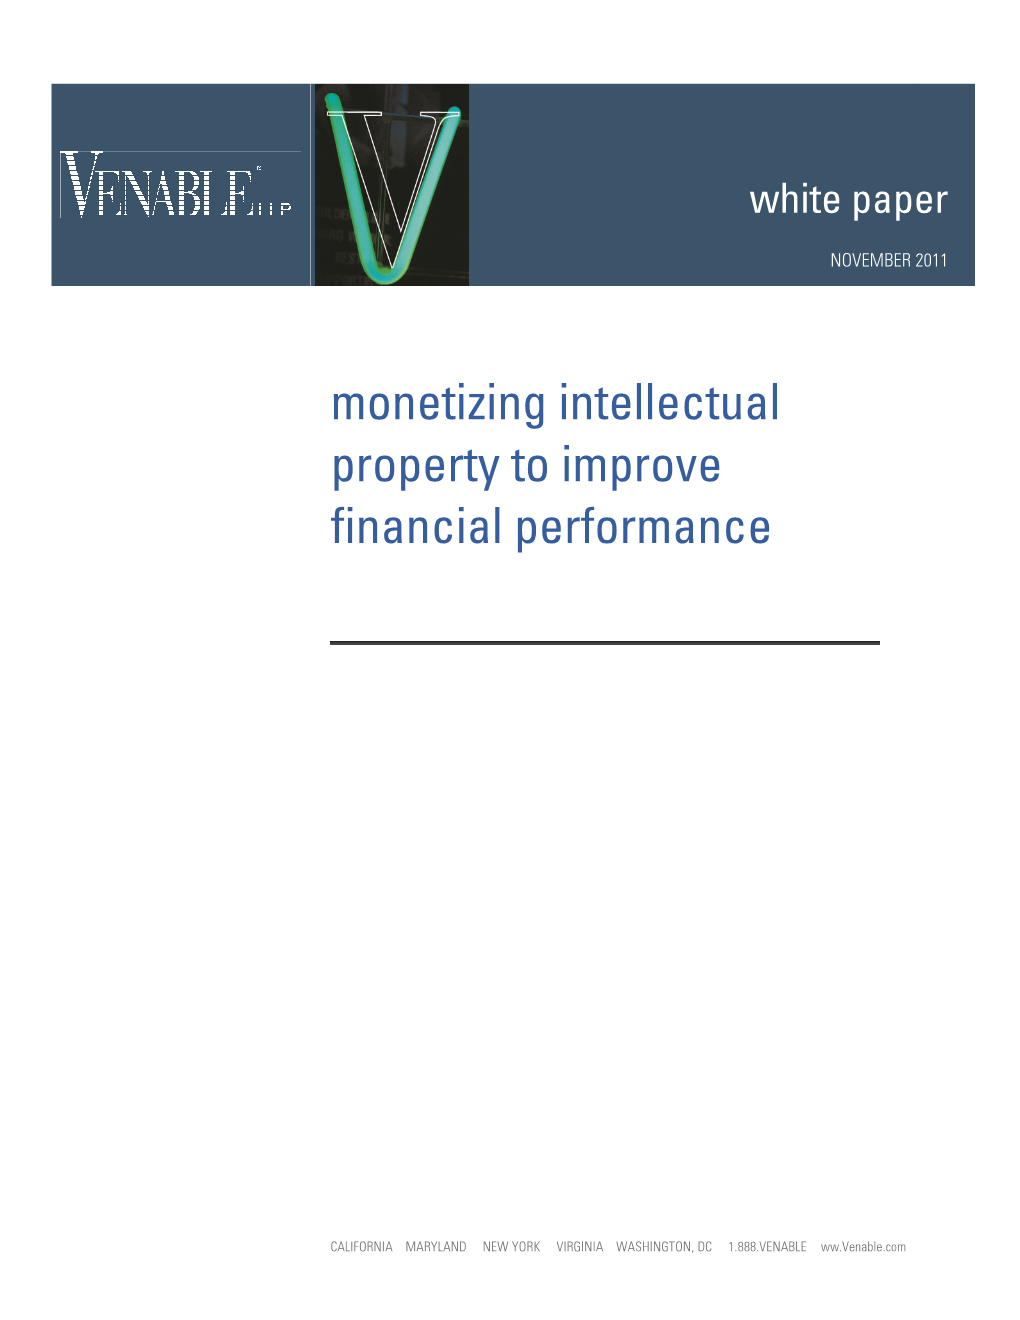 Monetizing Intellectual Property to Improve Financial Performance